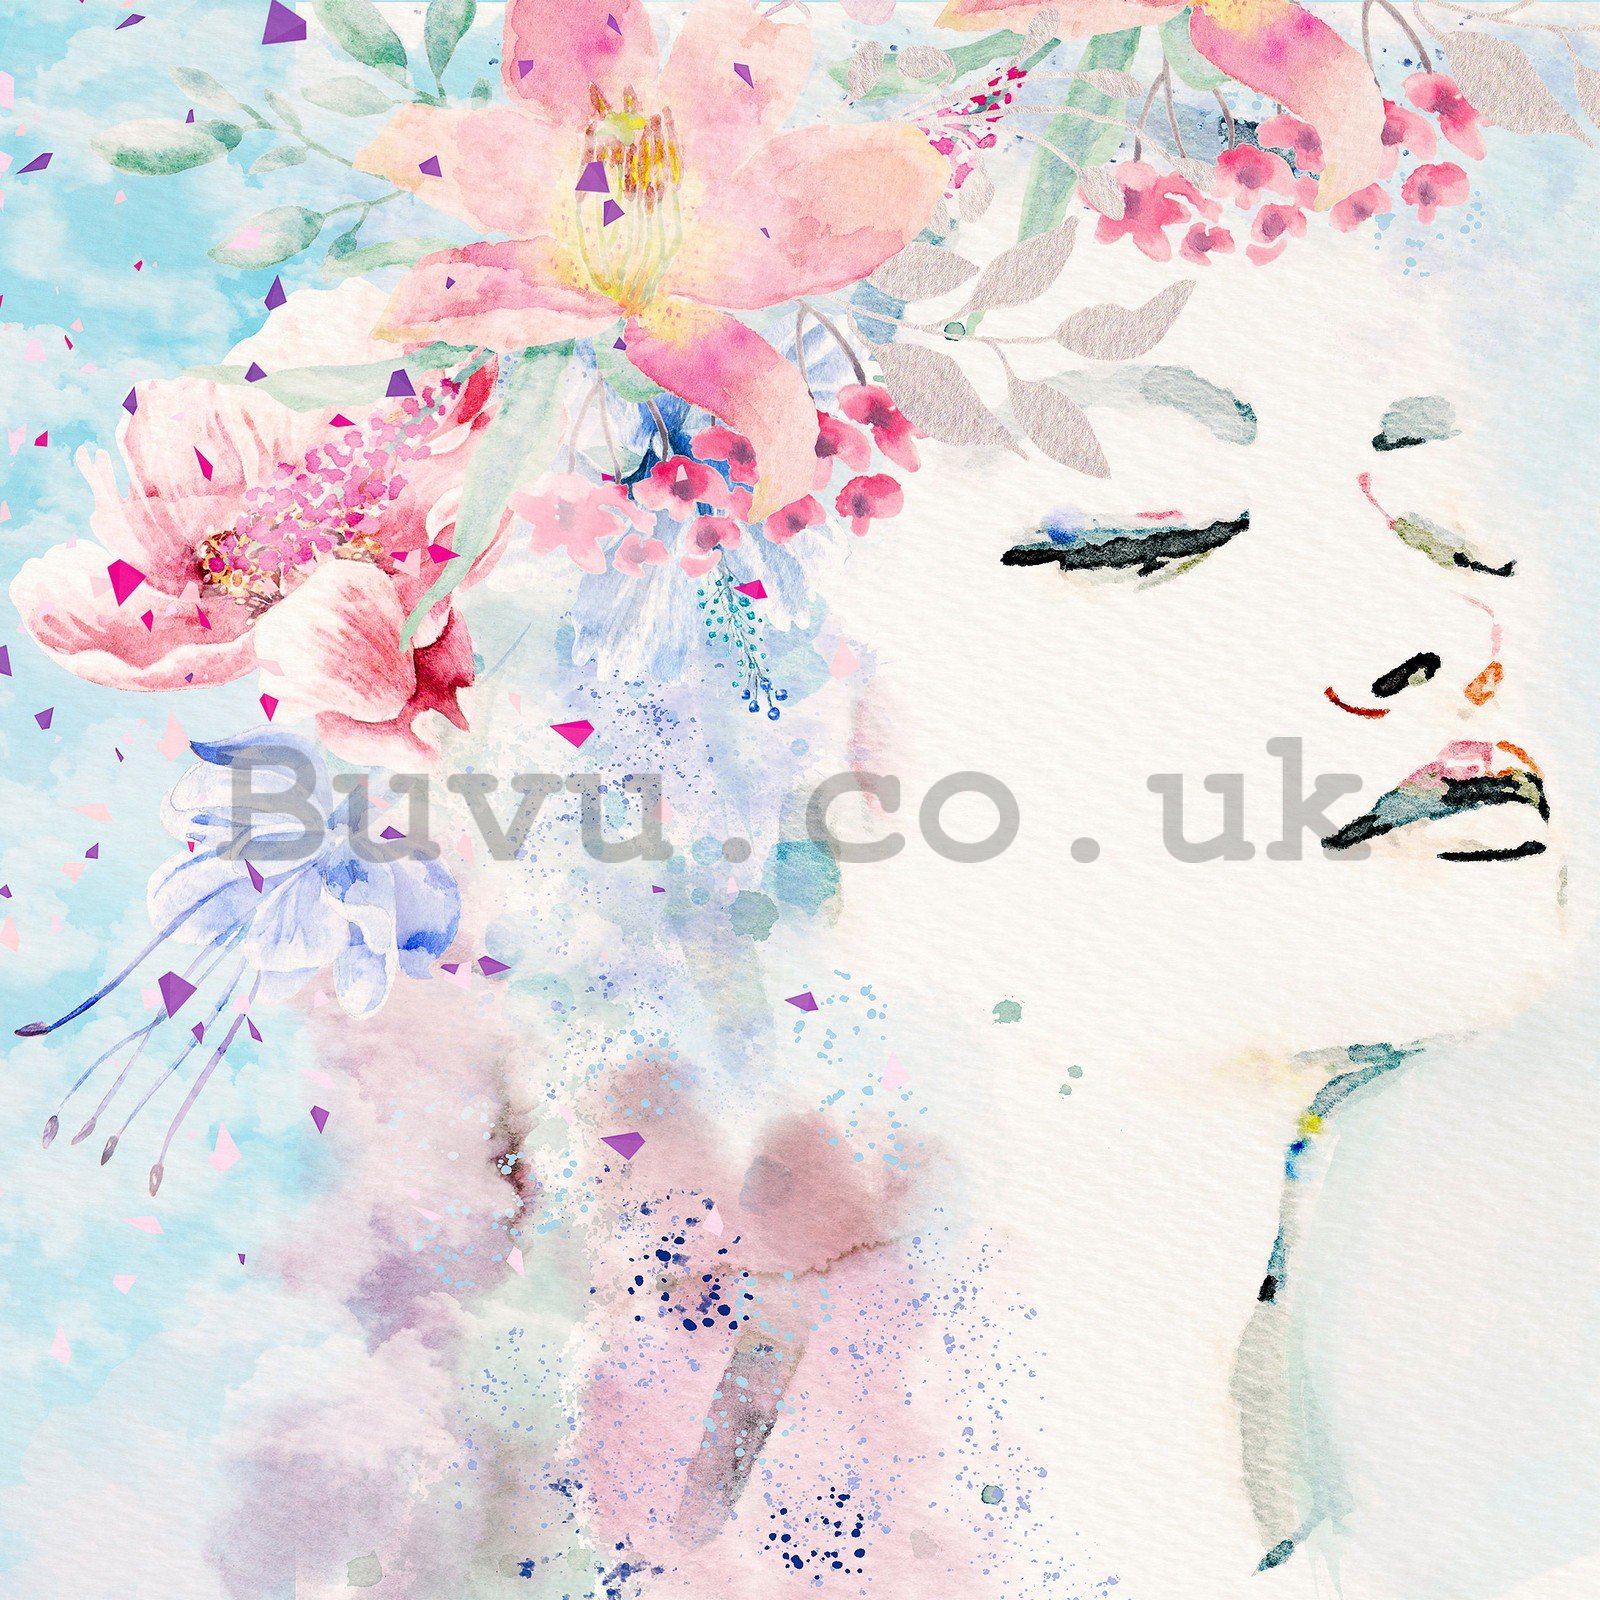 Wall mural vlies: Woman with flowers - 152,5x104 cm